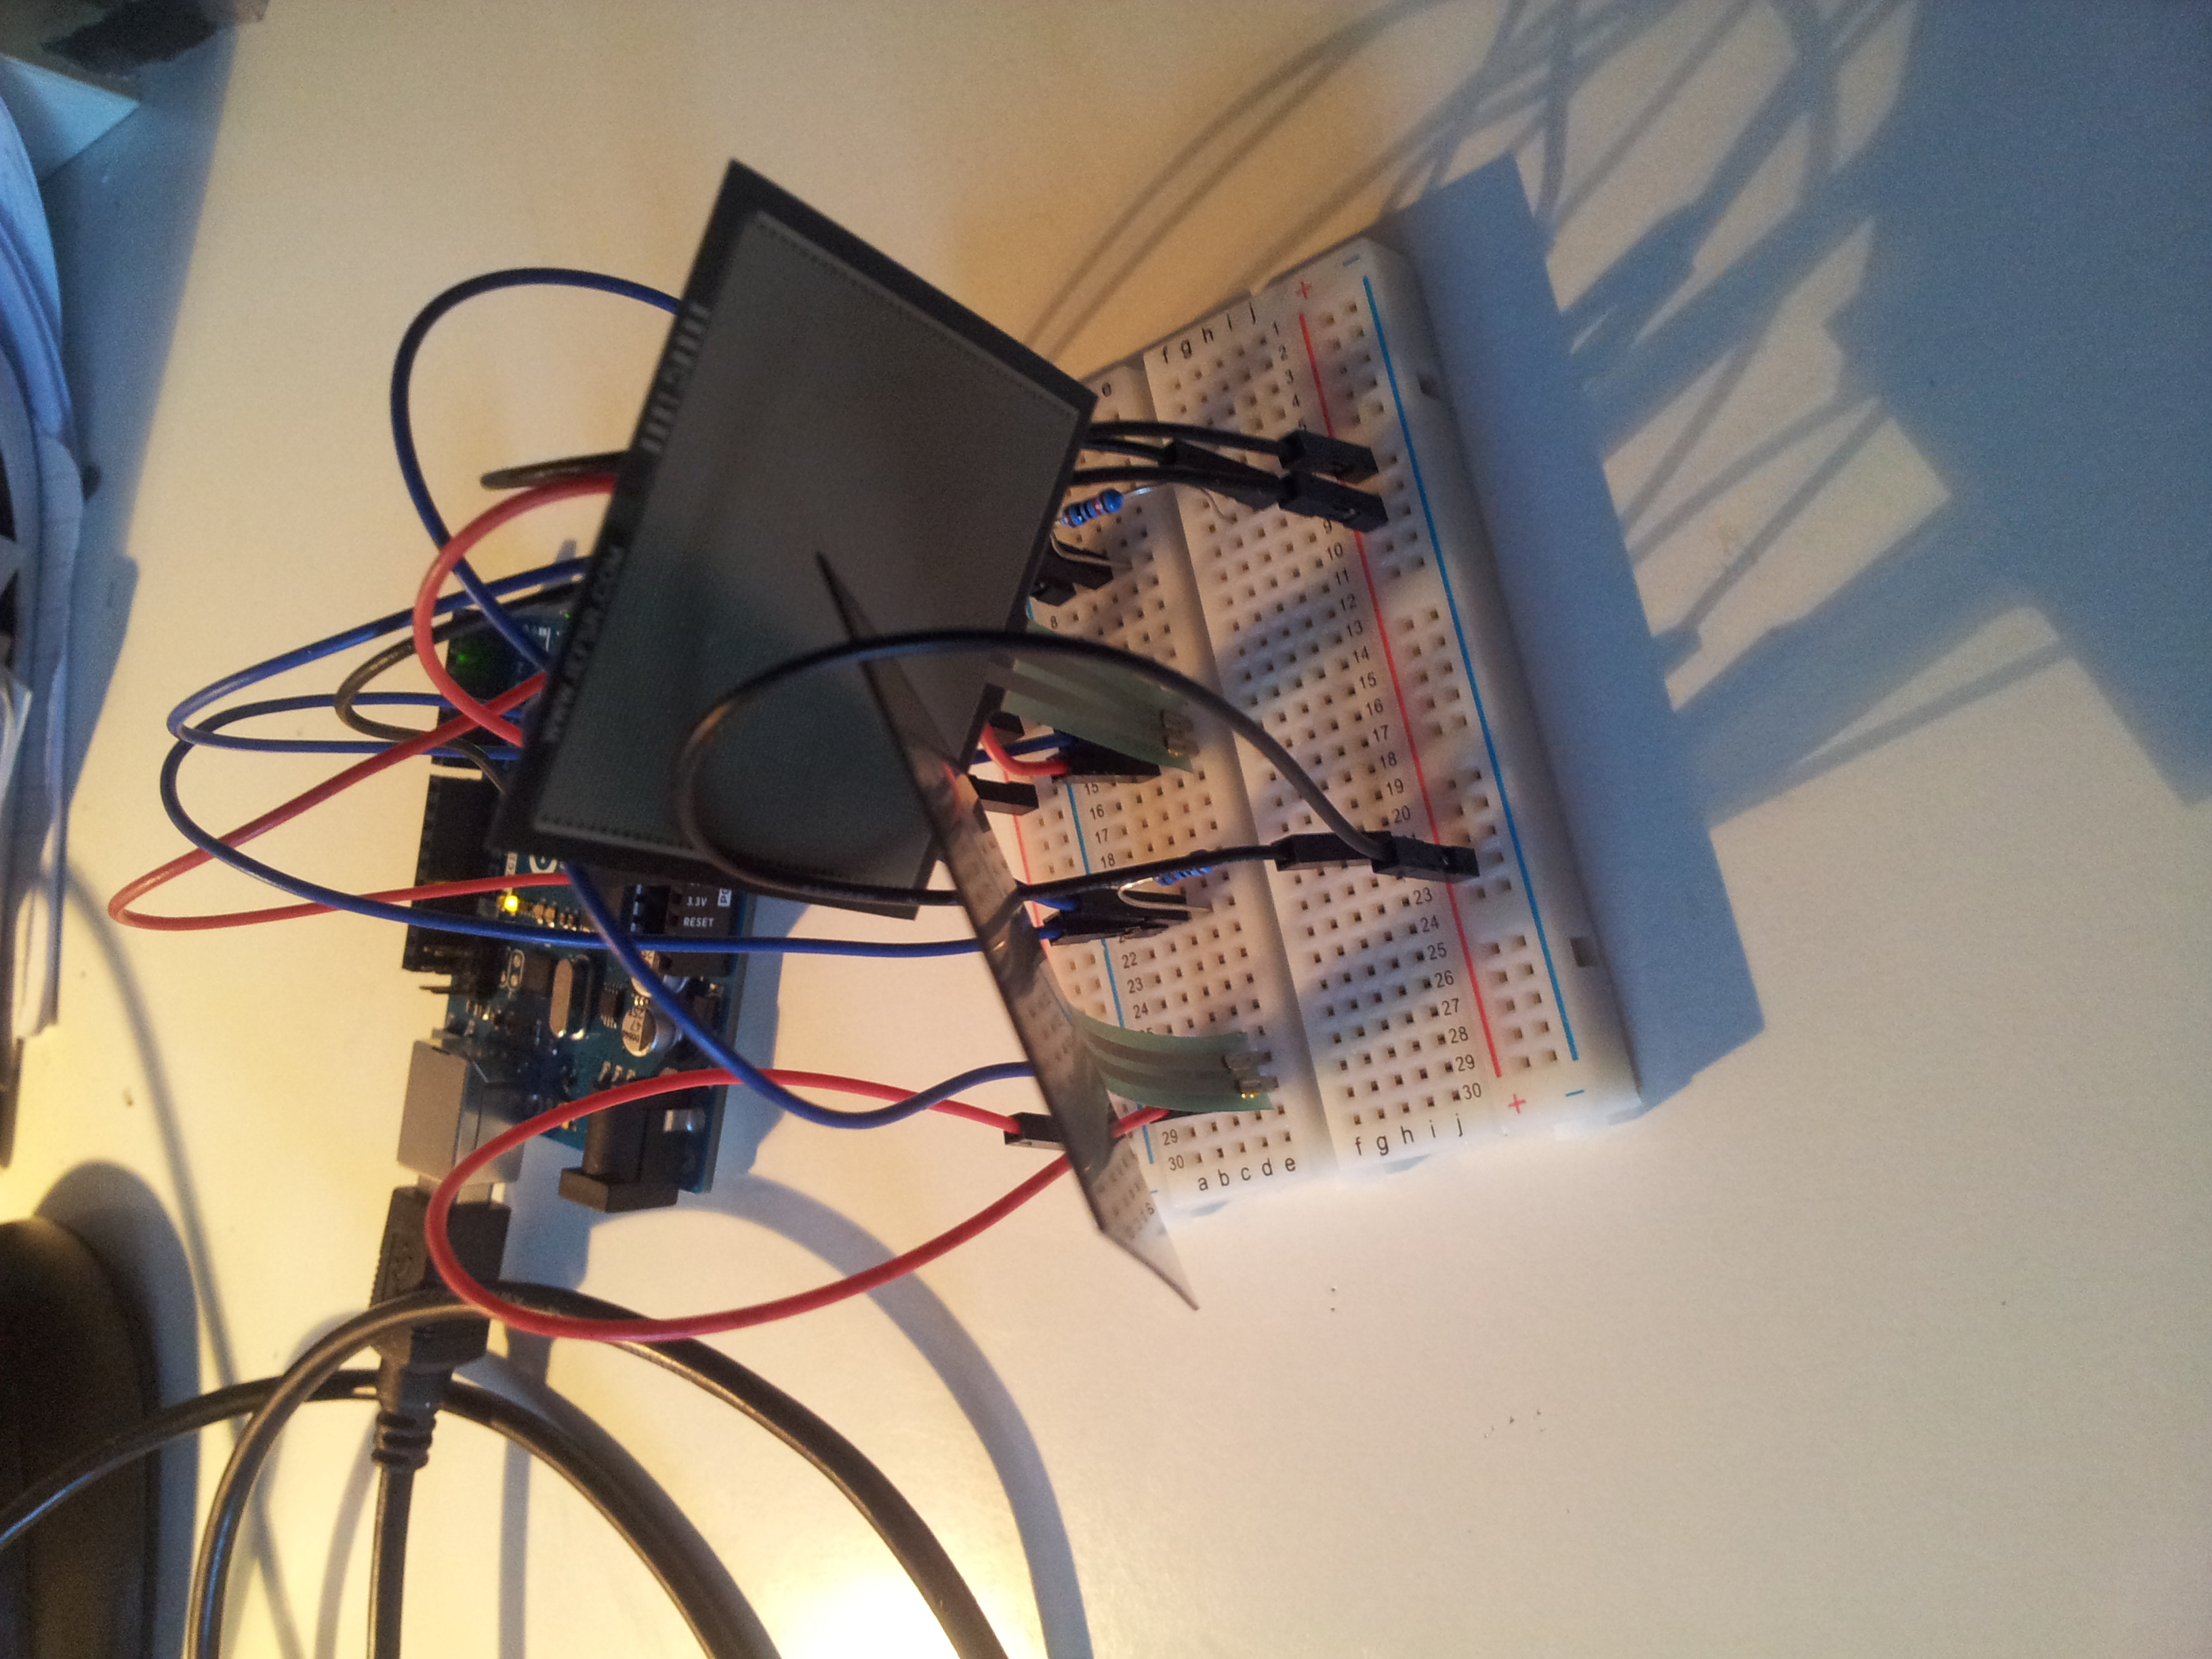 Picture of breadboard electronic setup